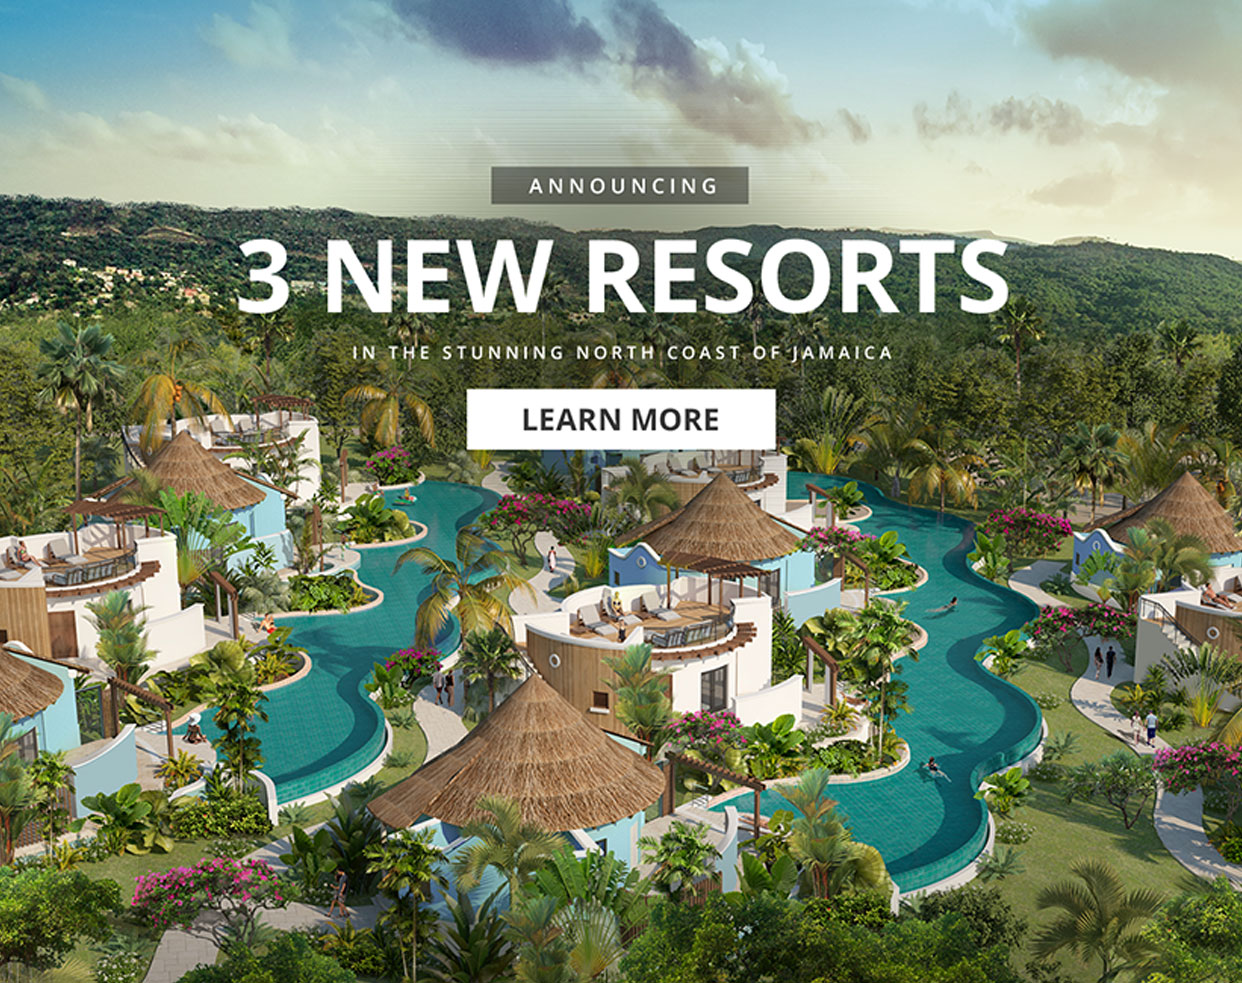 Luxury All-Inclusive Caribbean Holidays  Sandals Resorts